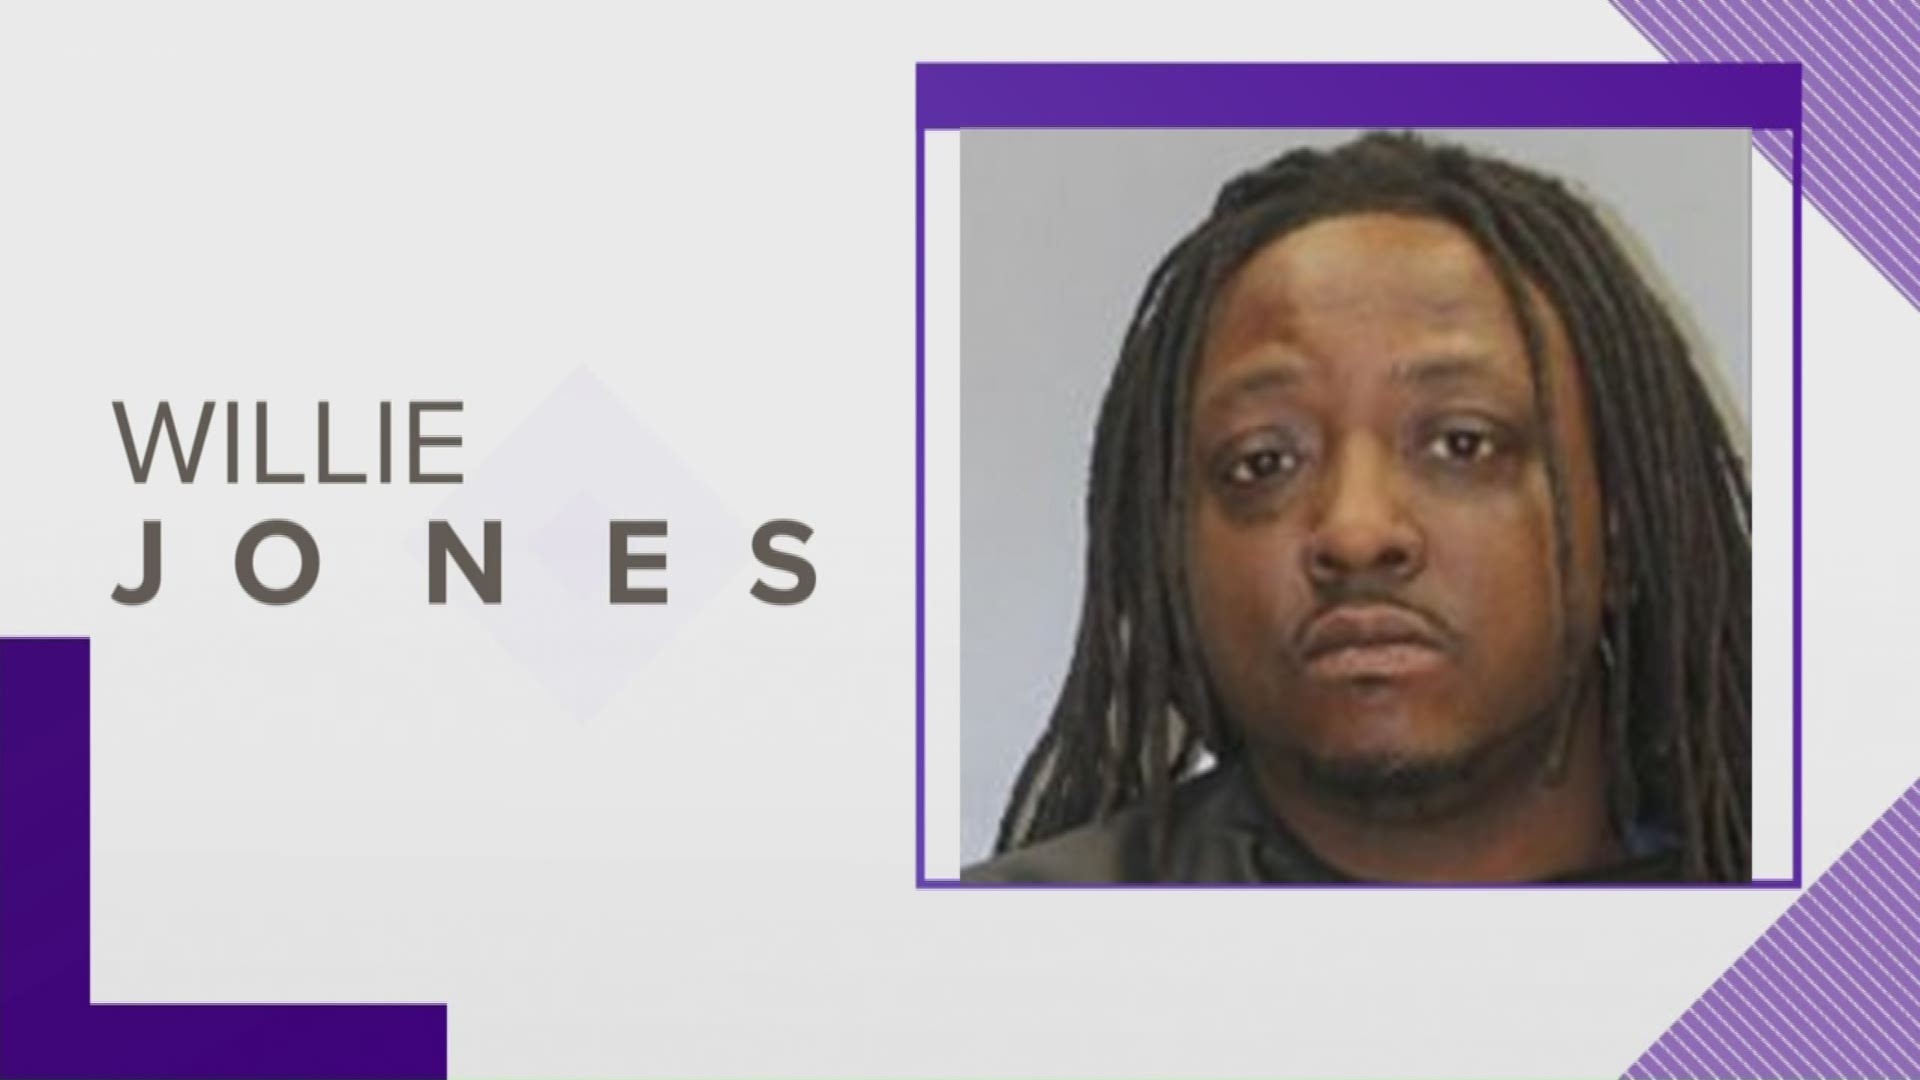 Willie Lee Jones has been charged with four counts of attempted murder